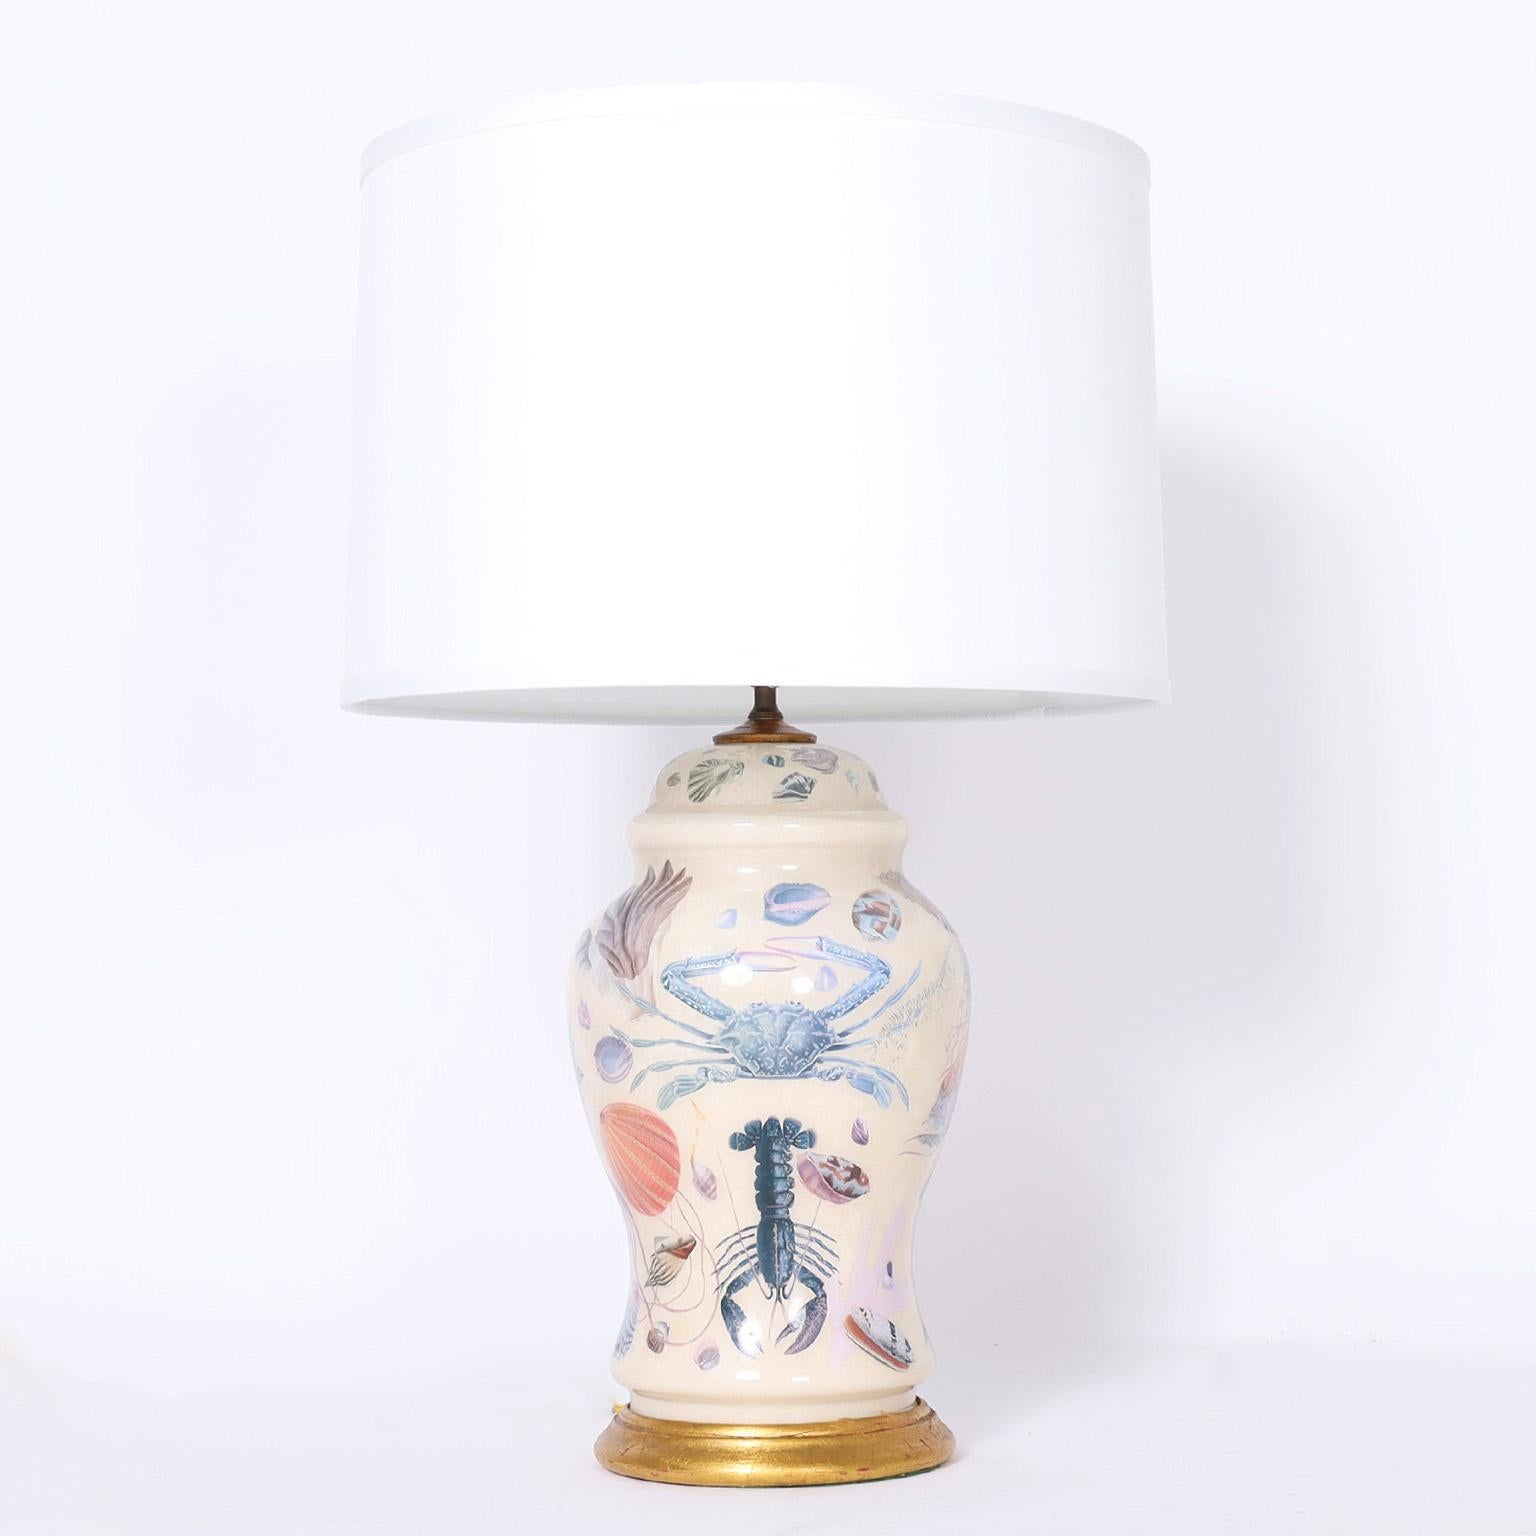 Charming and whimsical pair of table lamps with classic form decorated with a reverse decoupage technique under glass of sea life and shells on a white background. Signed 